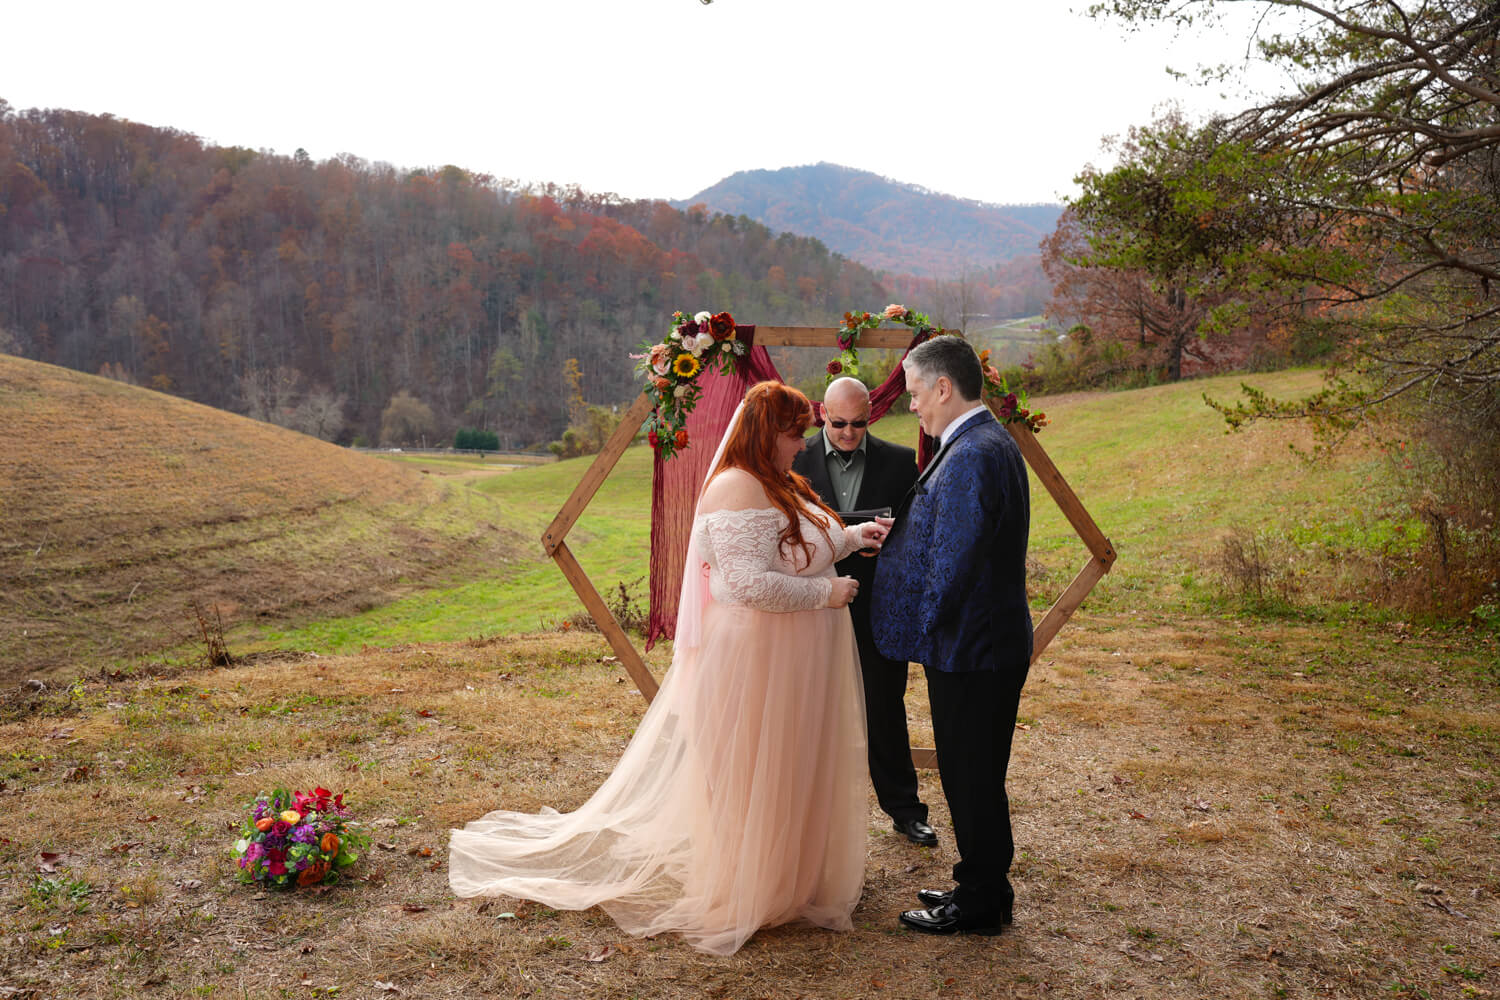 Wedding couple getting married in late fall in a field with a mountain view at Honeysuckle Hills in the Smoky Mountains